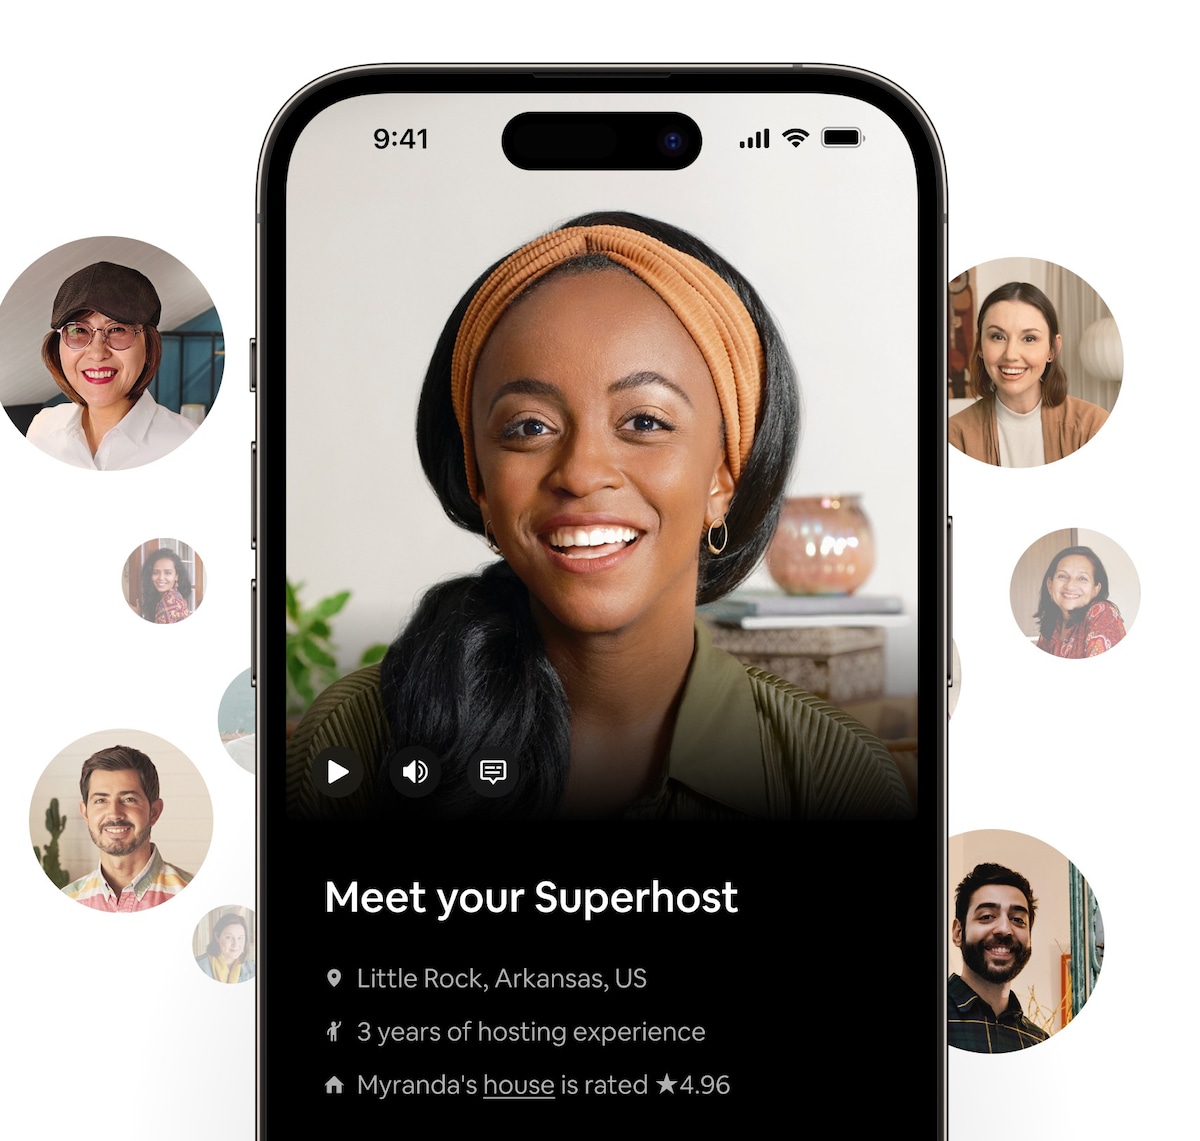 A smiling Superhost in the Airbnb app. Text informs us that her name is Myranda, she has three years’ experience hosting in Little Rock, and her Airbnb rating is 4.96 stars out of 5.